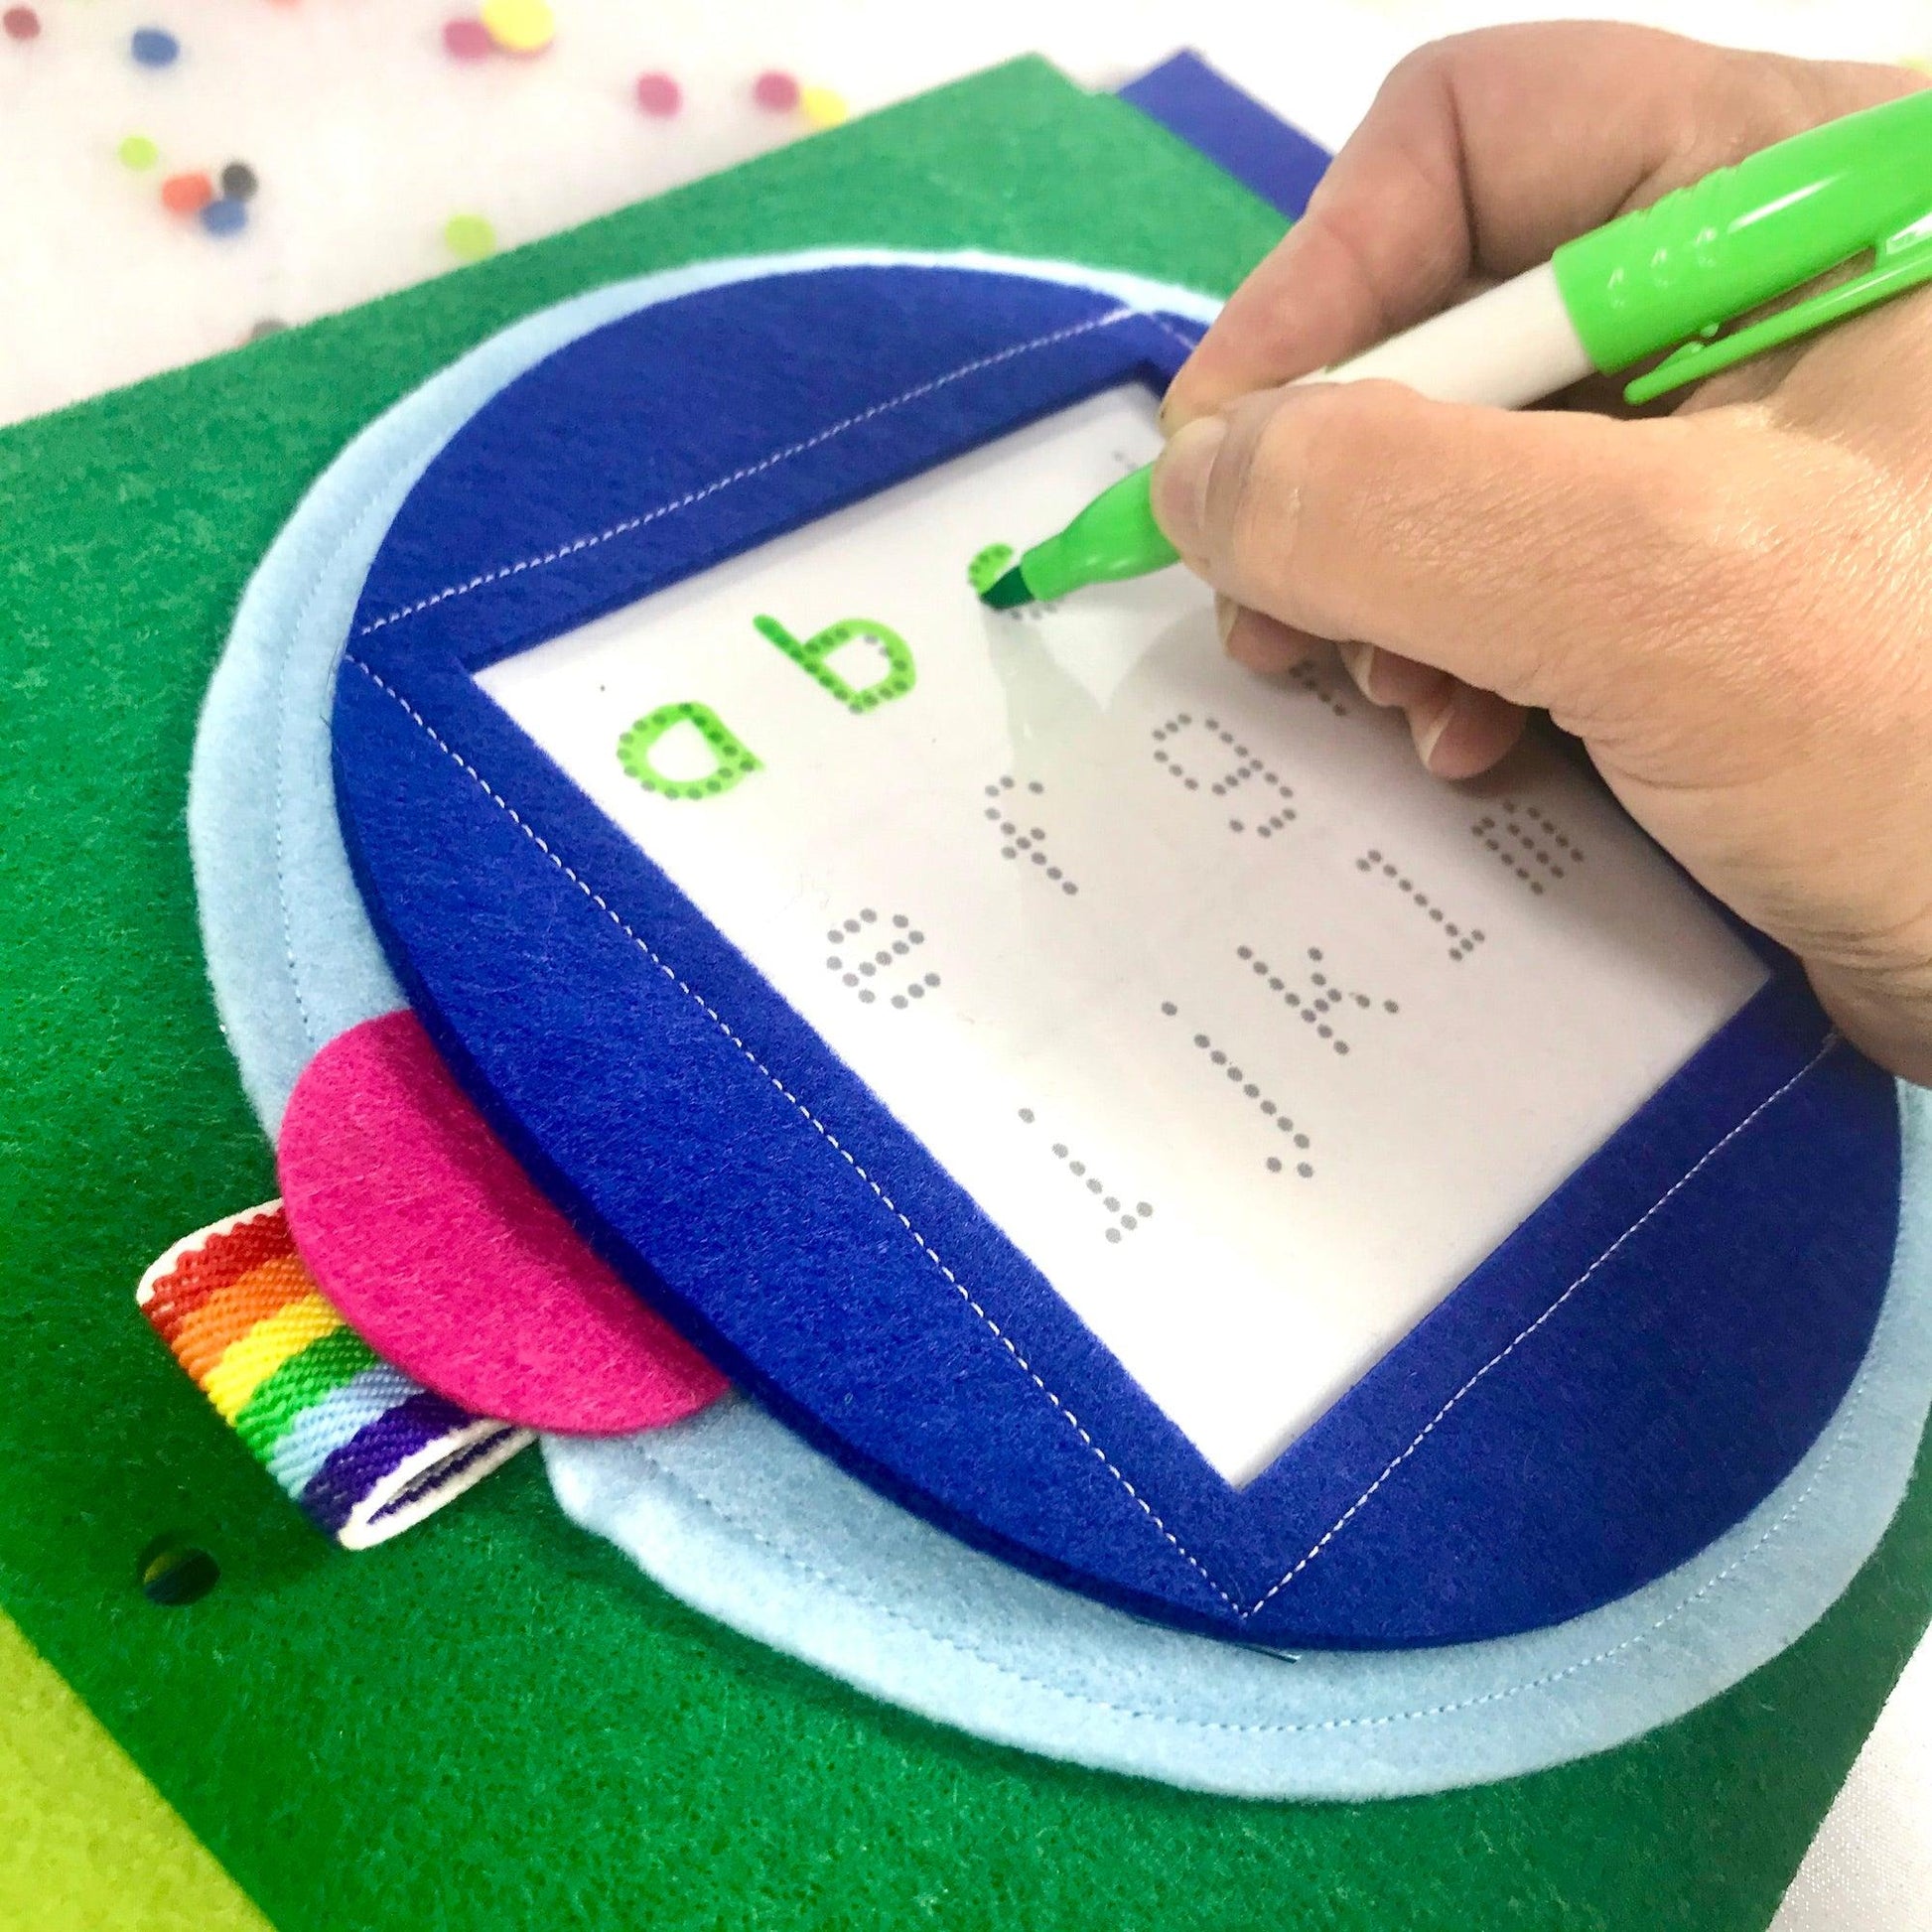 White Board Dry Erase Quiet Book Page - tinyfeats